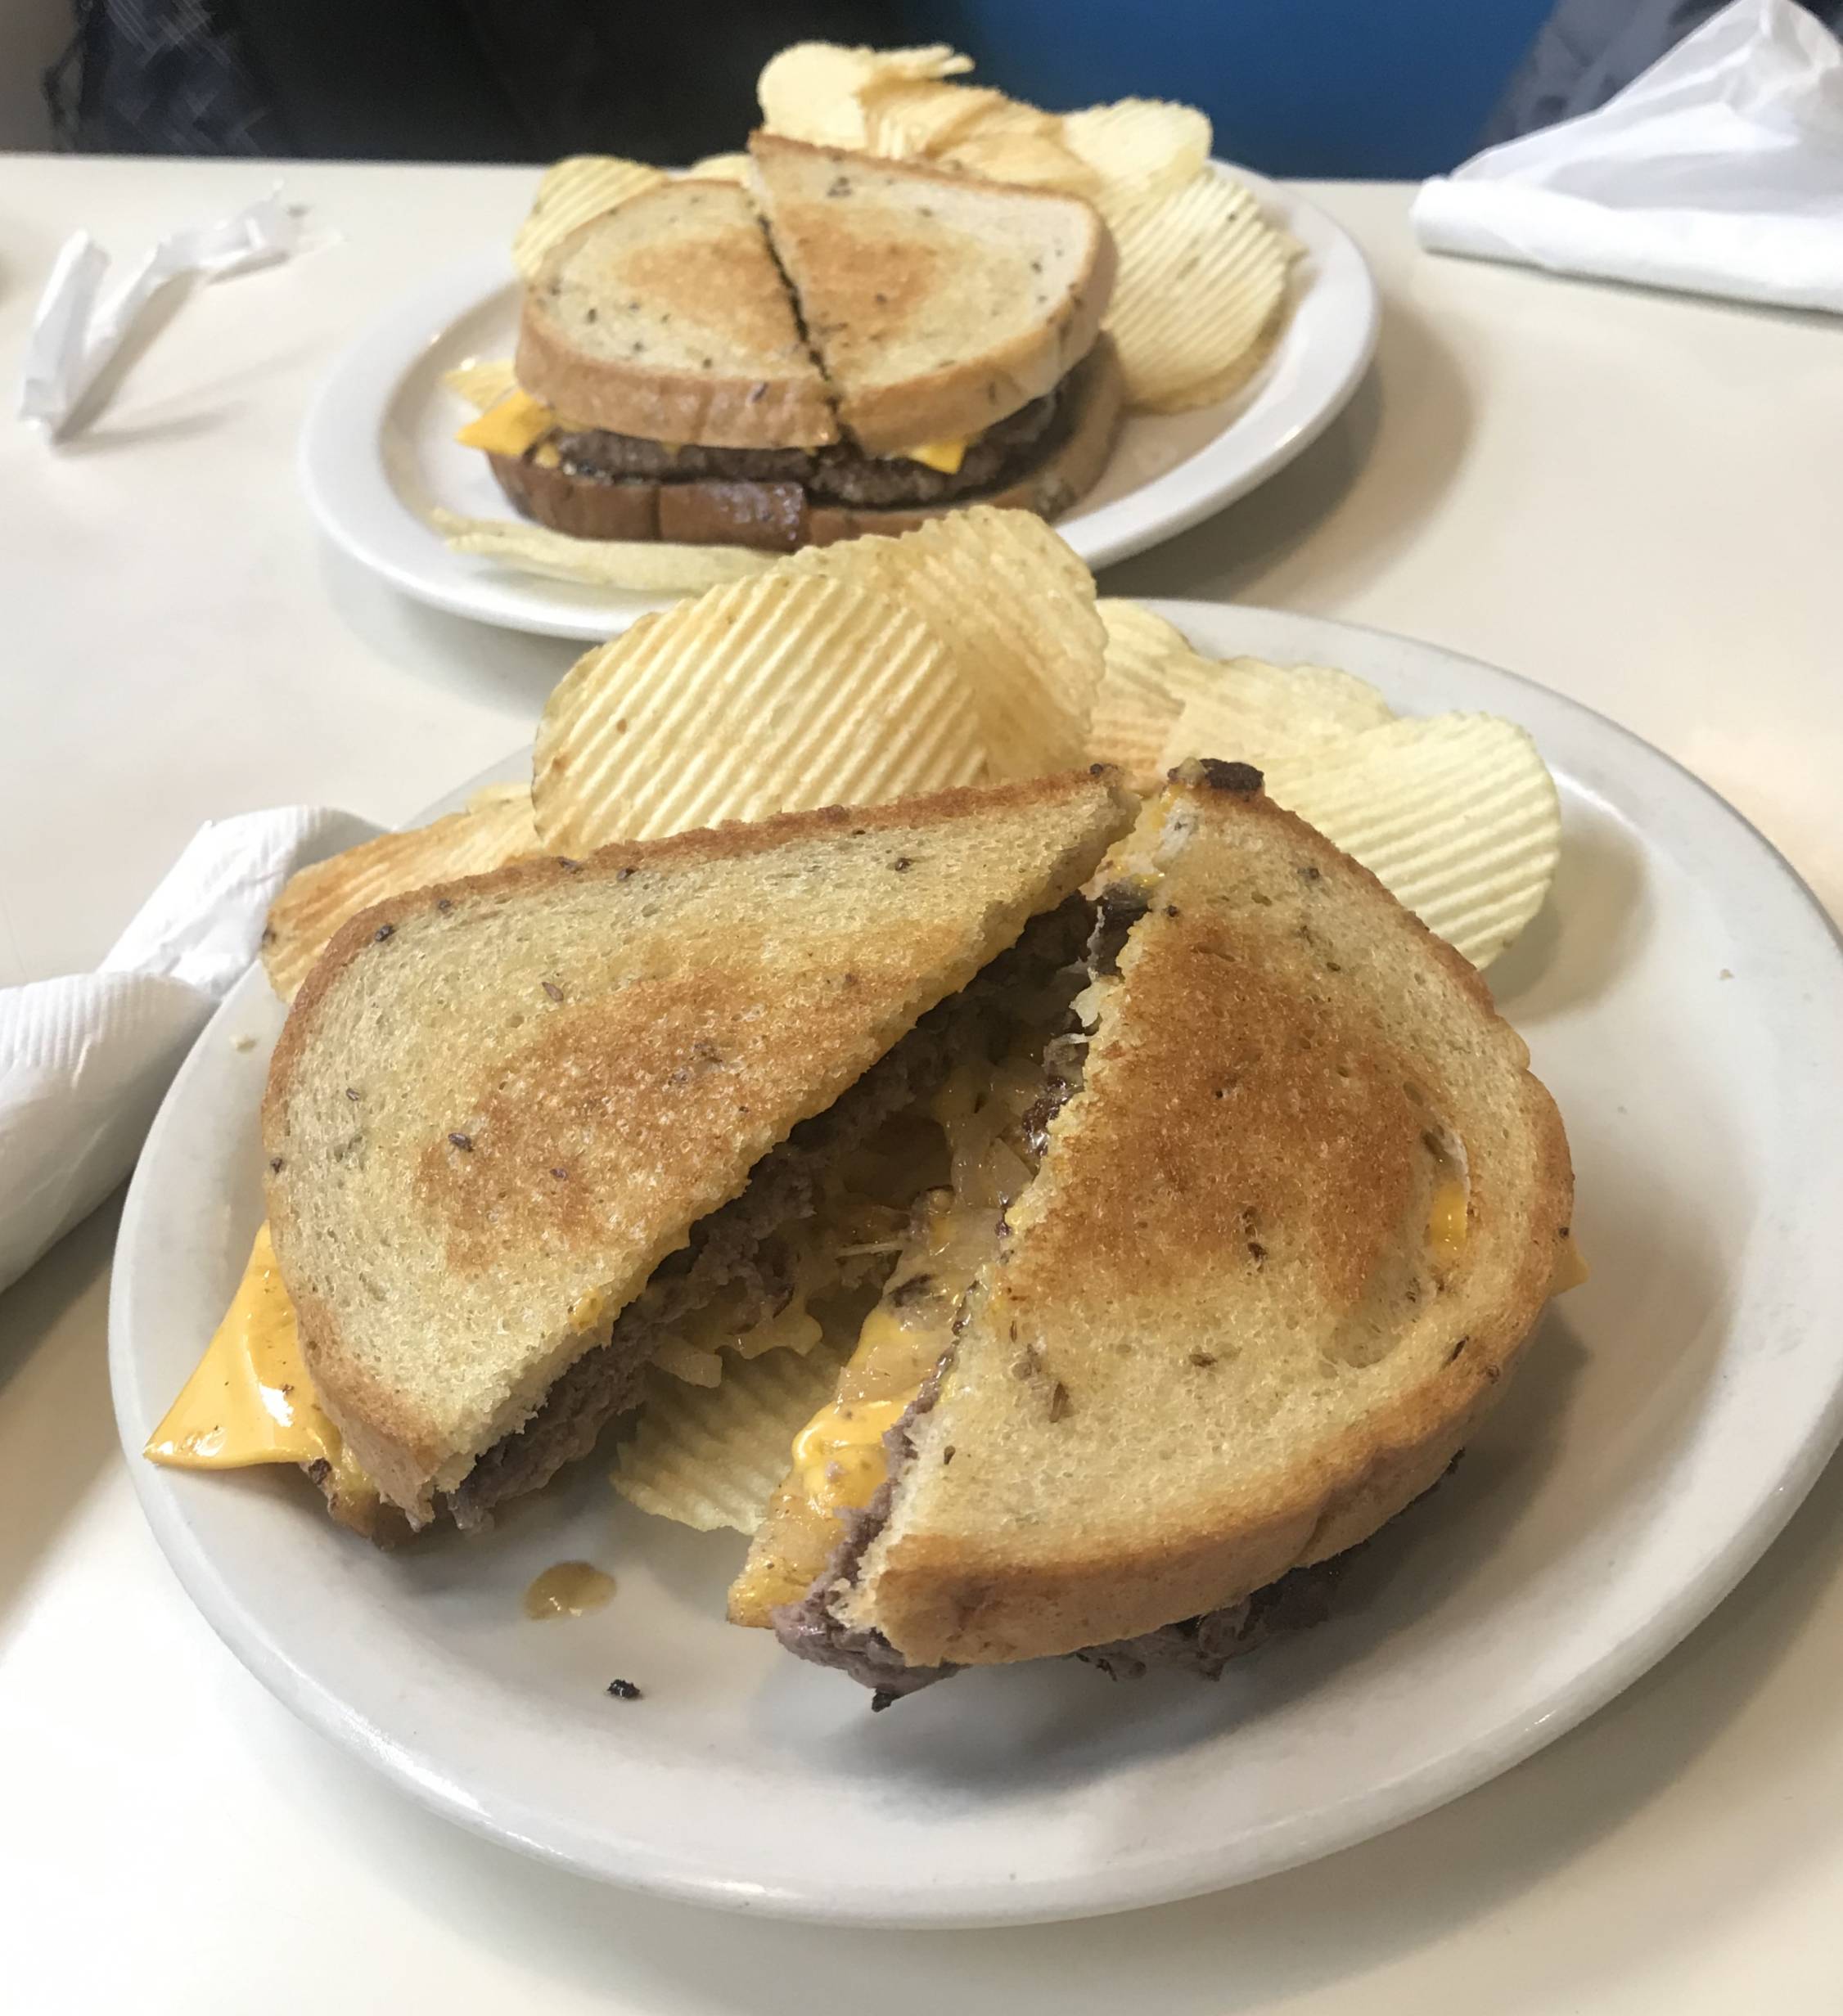 Two patty melts at Merry Annâ€™s served over a bed of potato chips. Both burgers are cut in half and inside the cheese seeps over the side of the buttered and toasted rye bread and a peak of a beef patty and slivers of onion. The plates sit on a white table with utensils and napkins. Photo by Kanea Hughes.